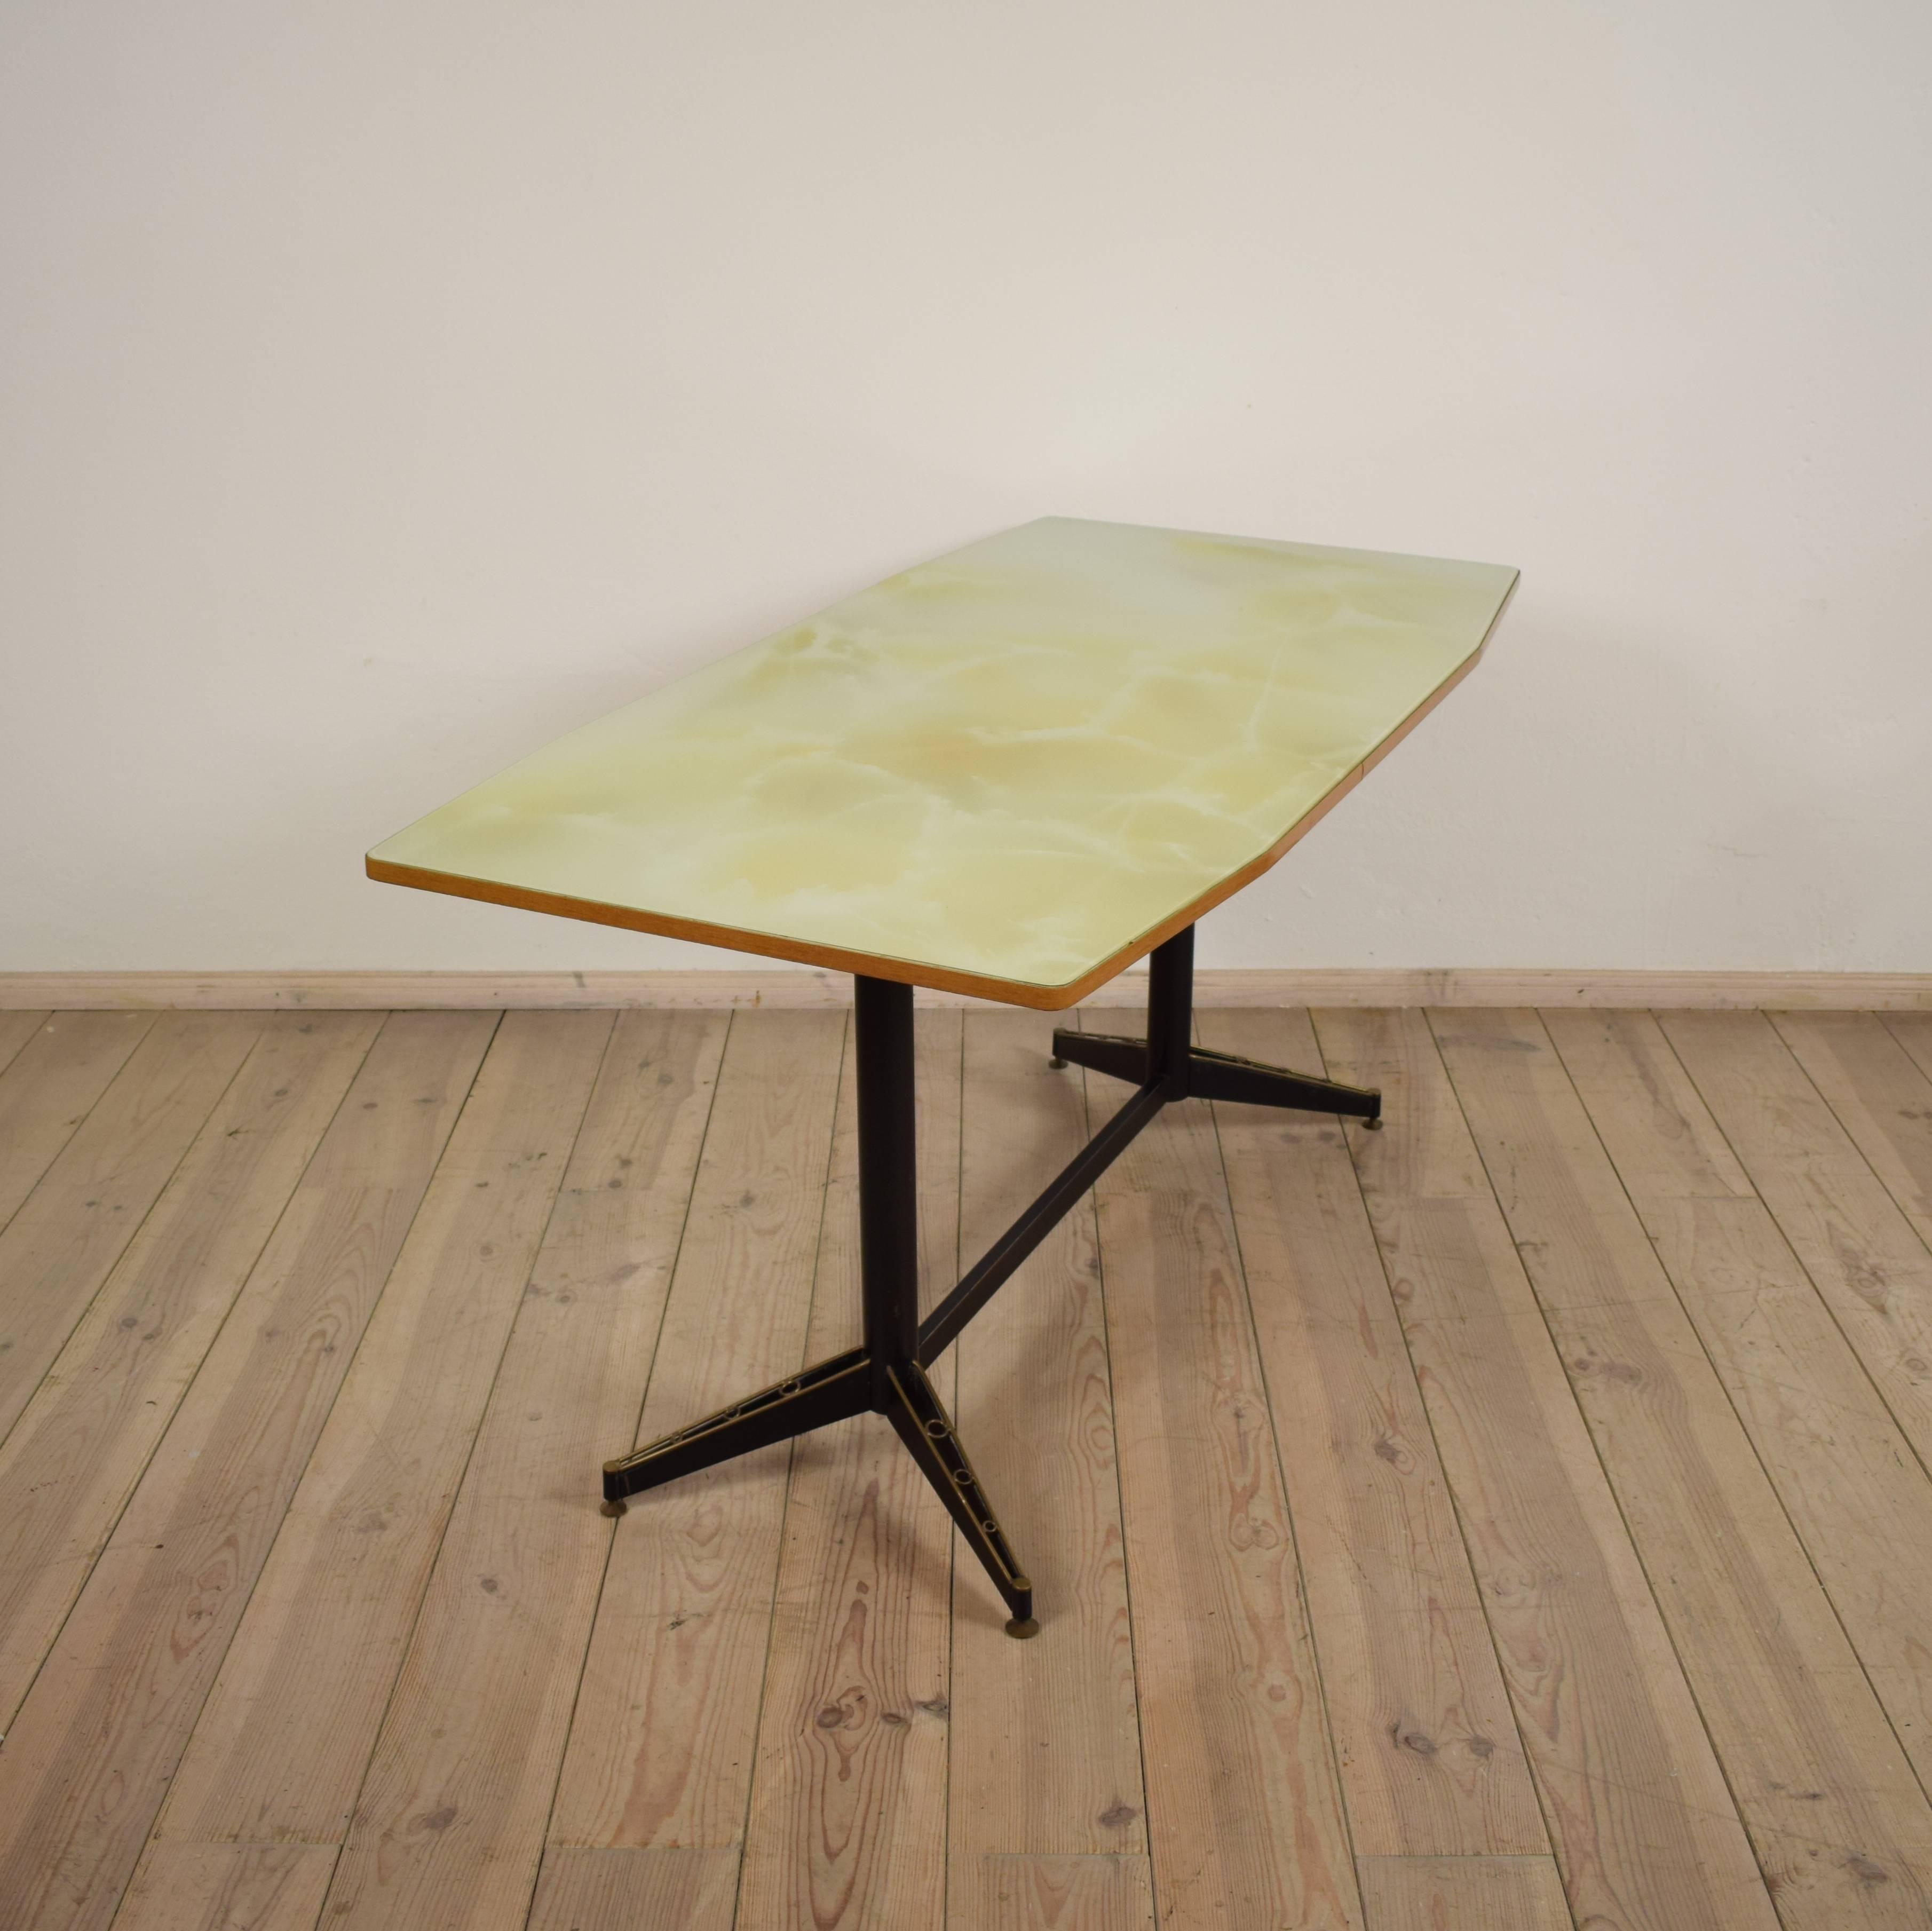 Lacquered Mid-Century Italian Glass Top Dining Table, 1950s